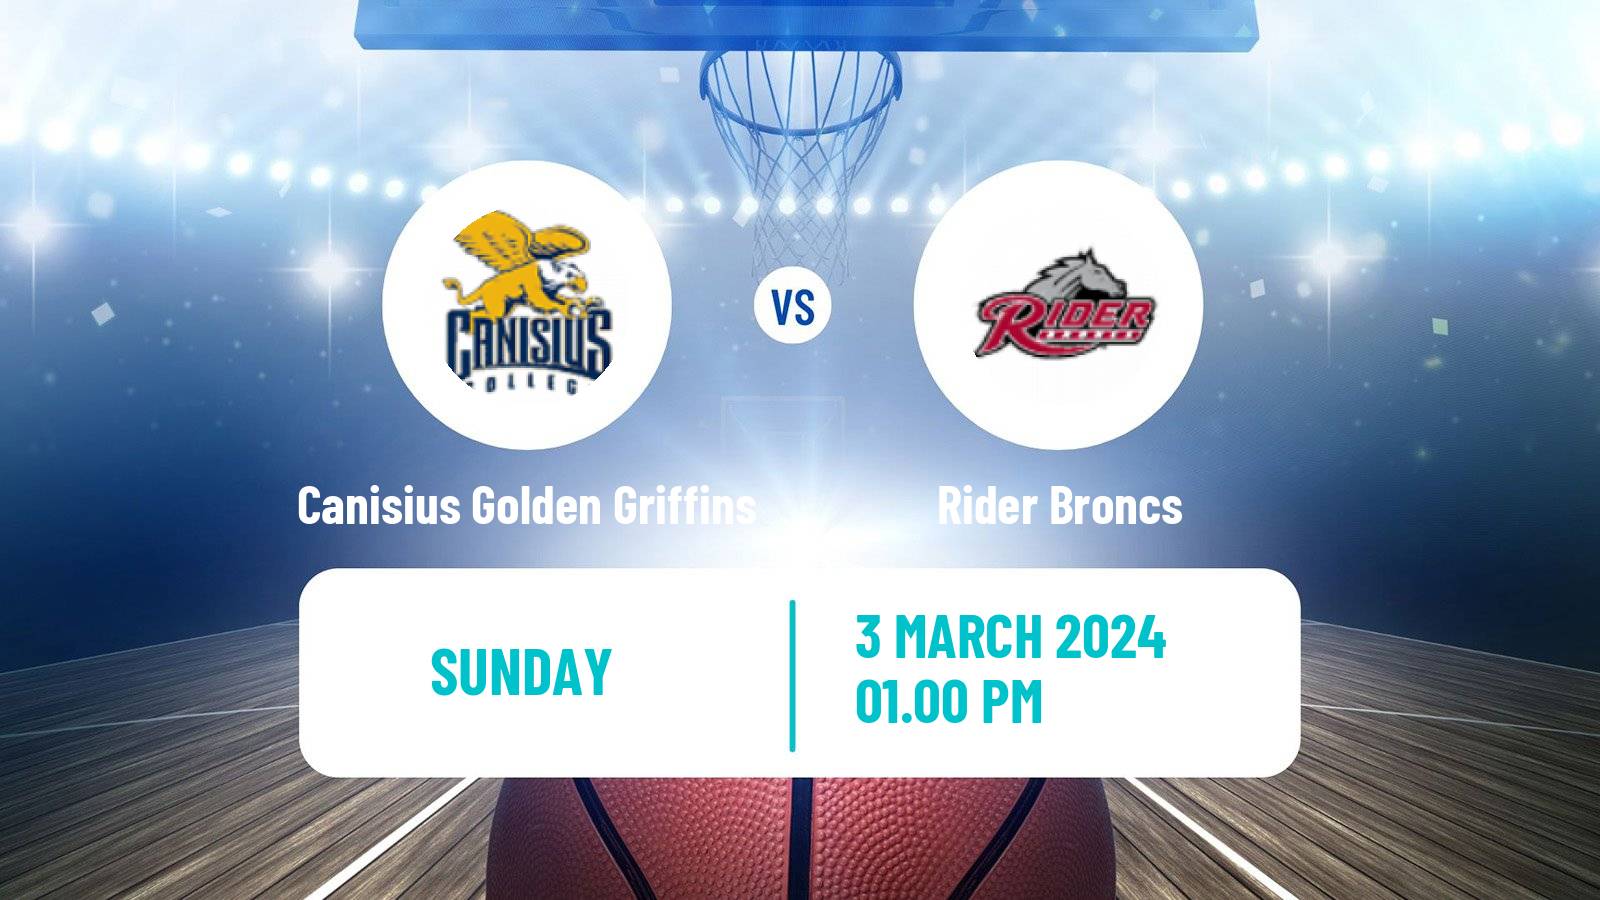 Basketball NCAA College Basketball Canisius Golden Griffins - Rider Broncs